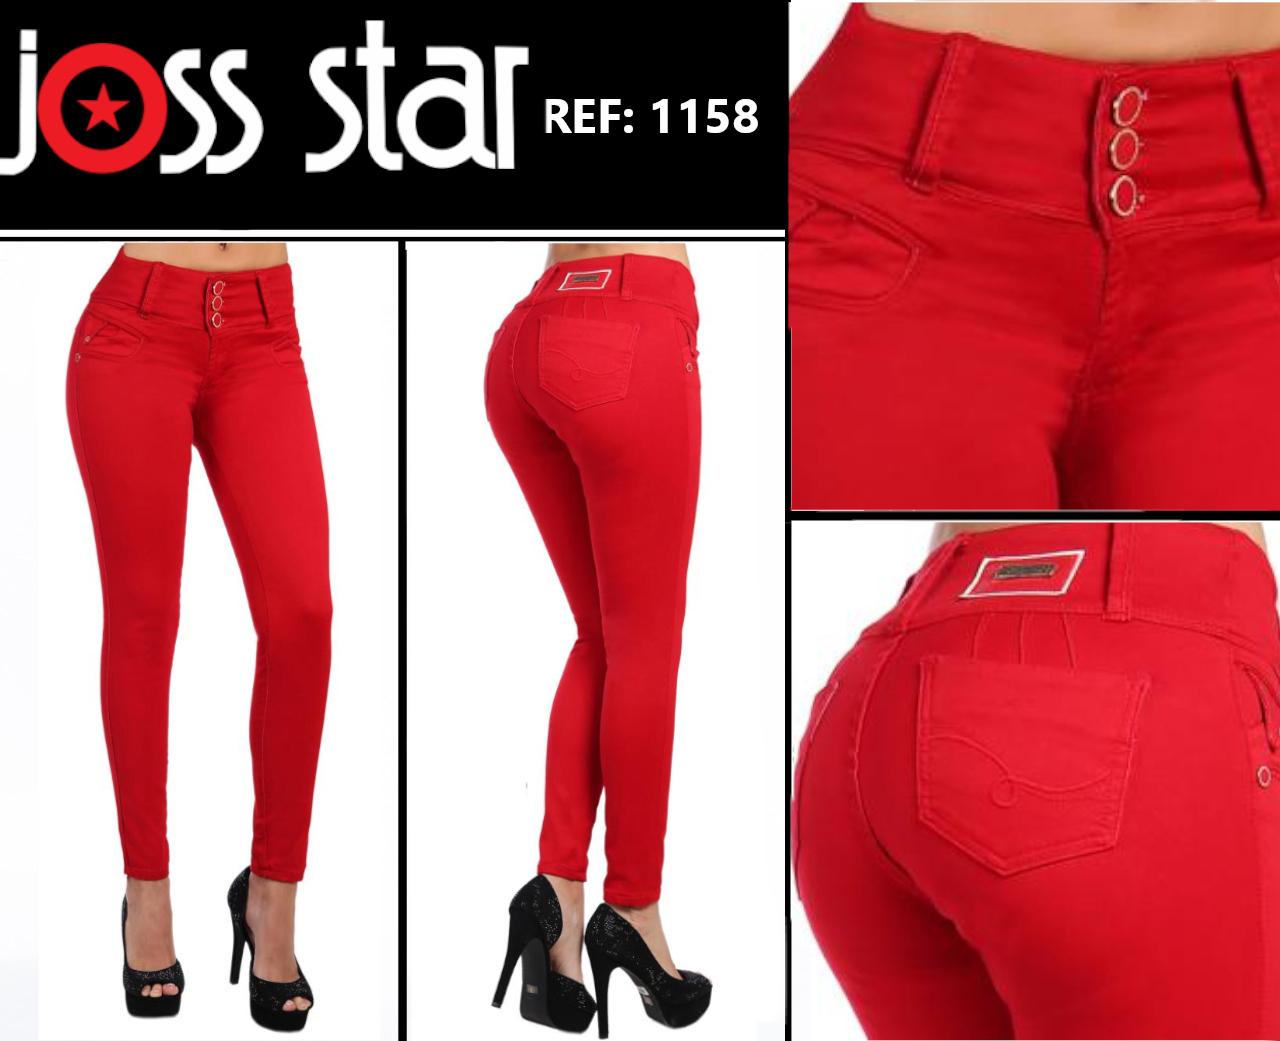 Colombian Cowboy Raises Tail Brand Joss Star with High Waist and Fashion Design, Red Color